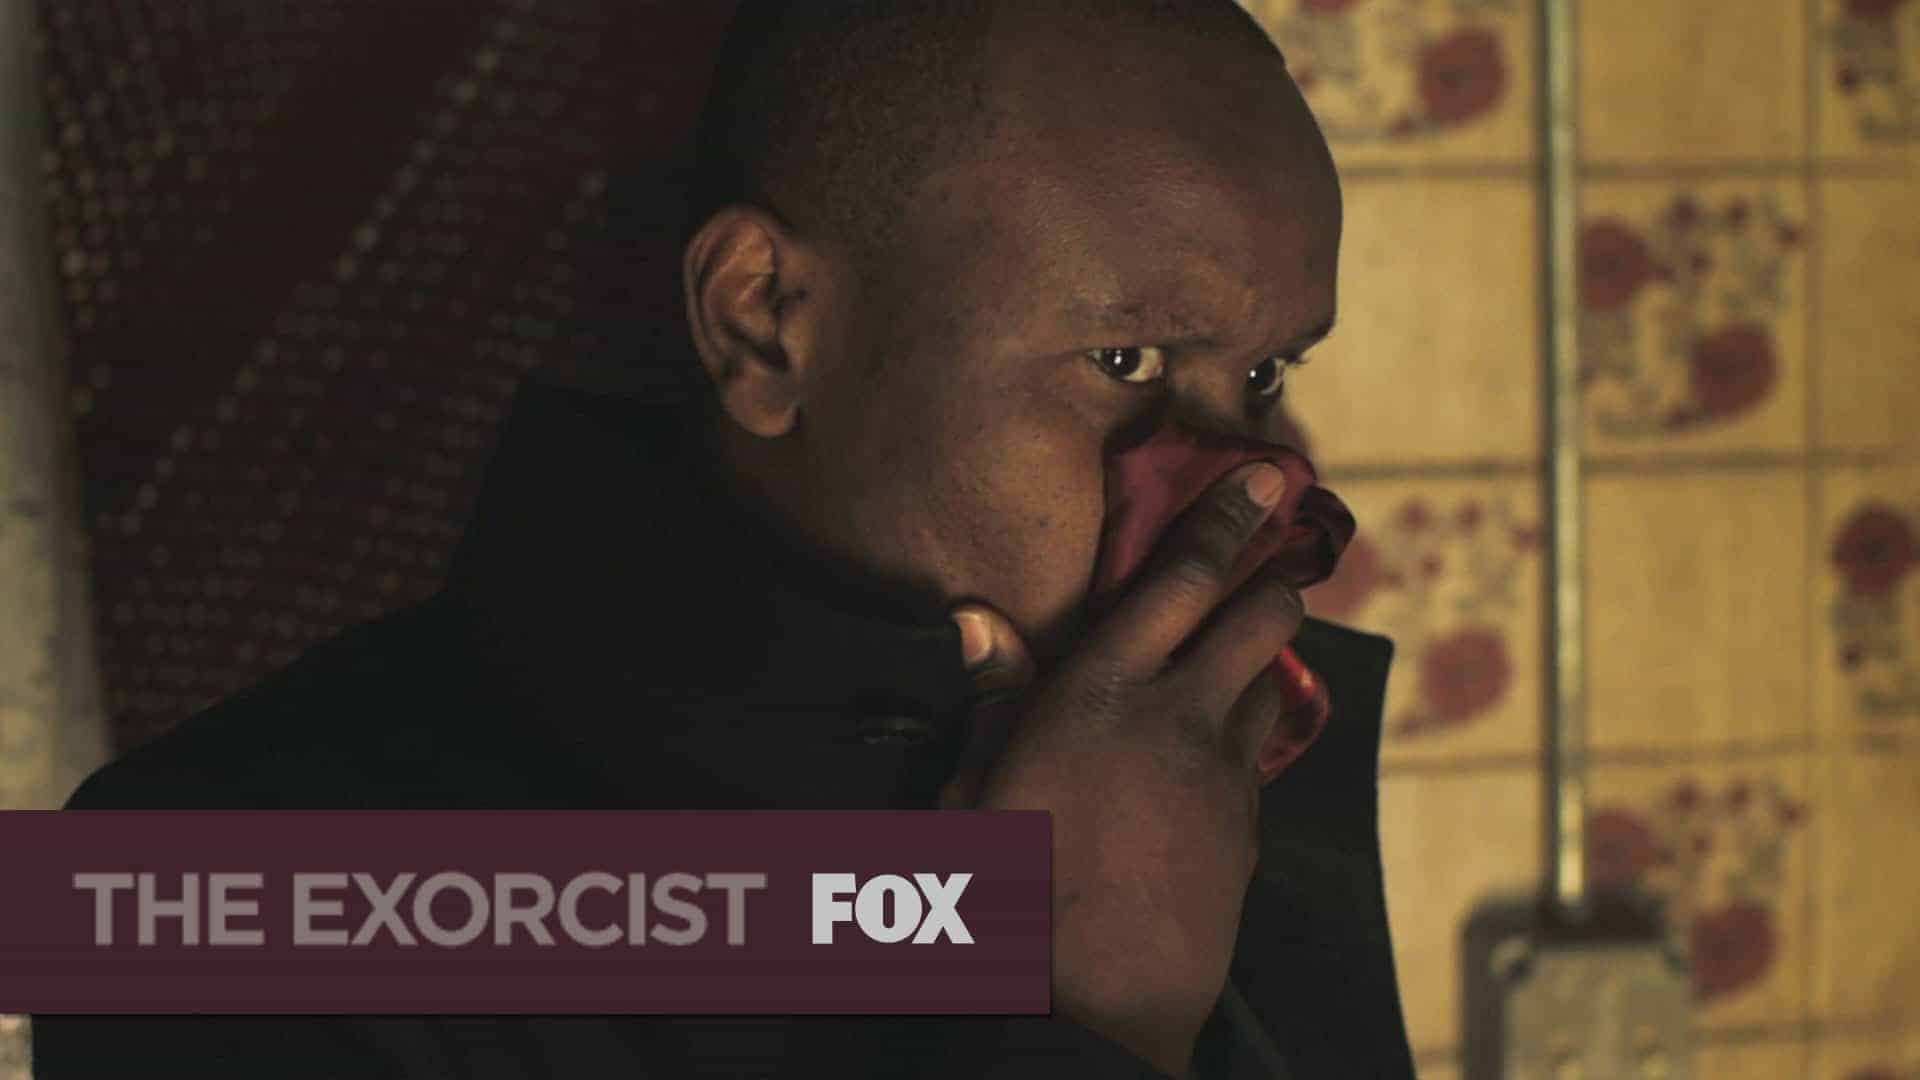 The Exorcist: TV spots show the first scenes from the TV series